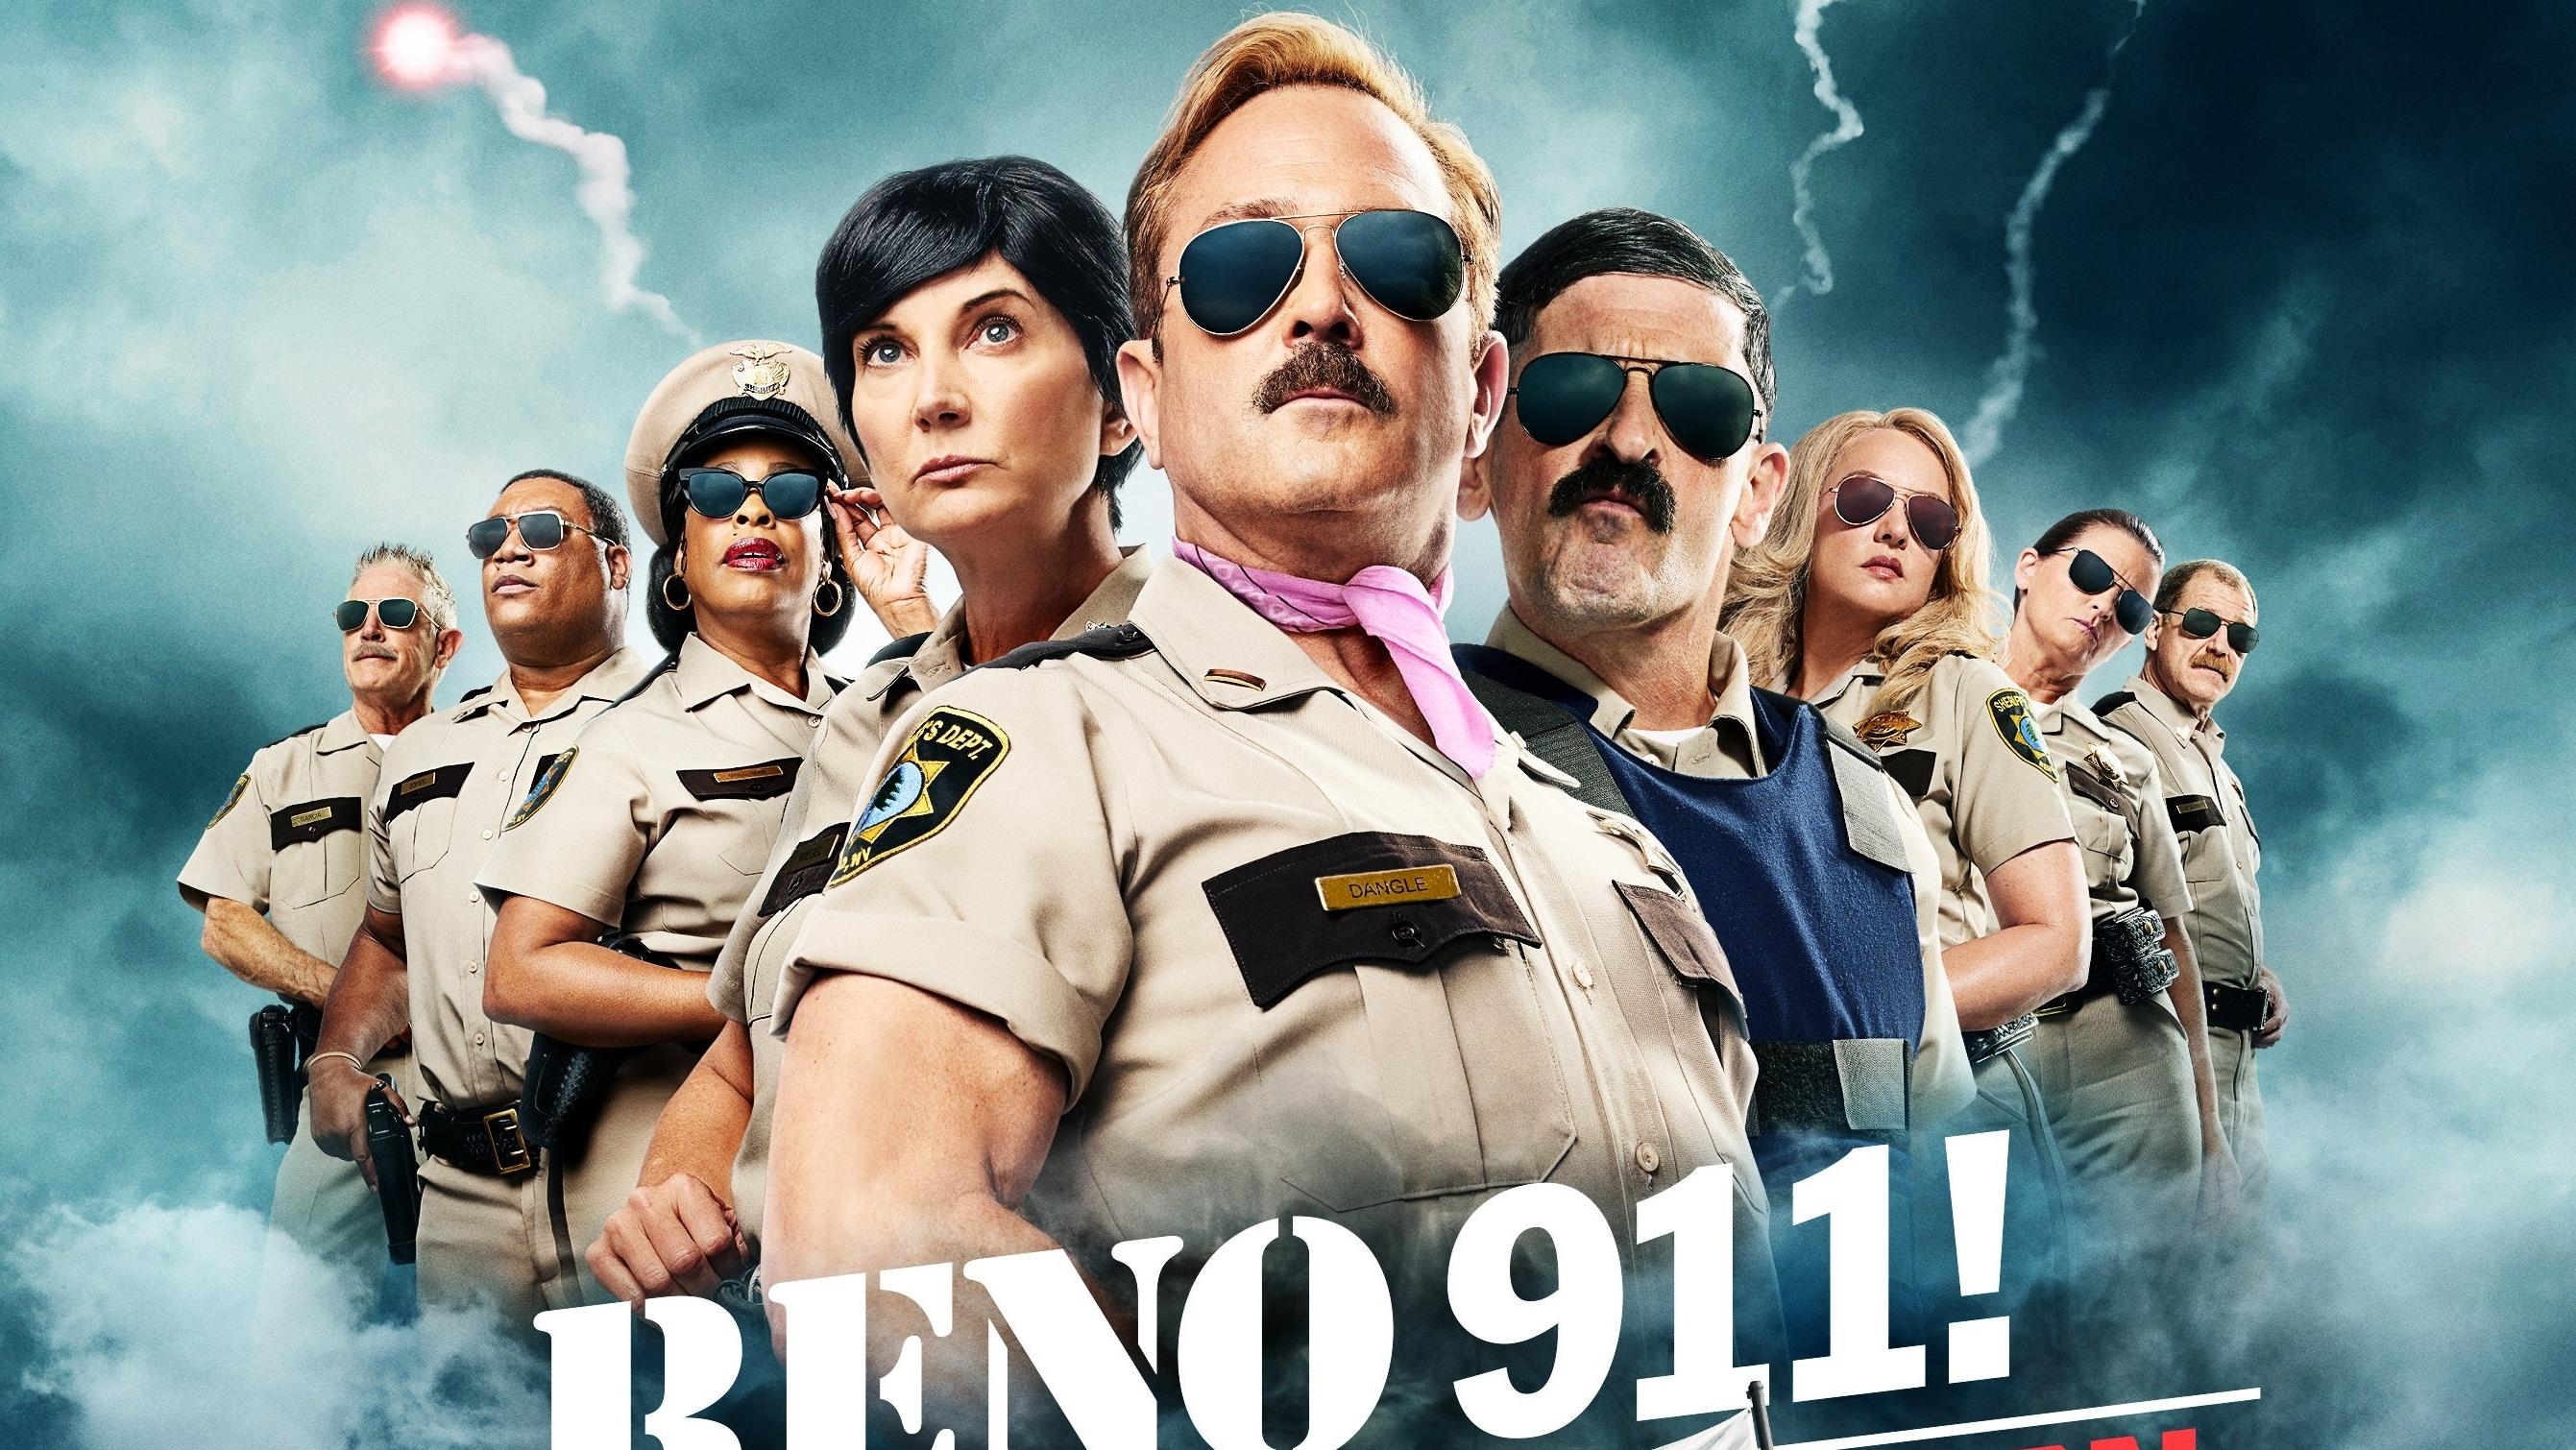 Reno 911!: The Hunt For QAnon to air on Paramount Plus next month